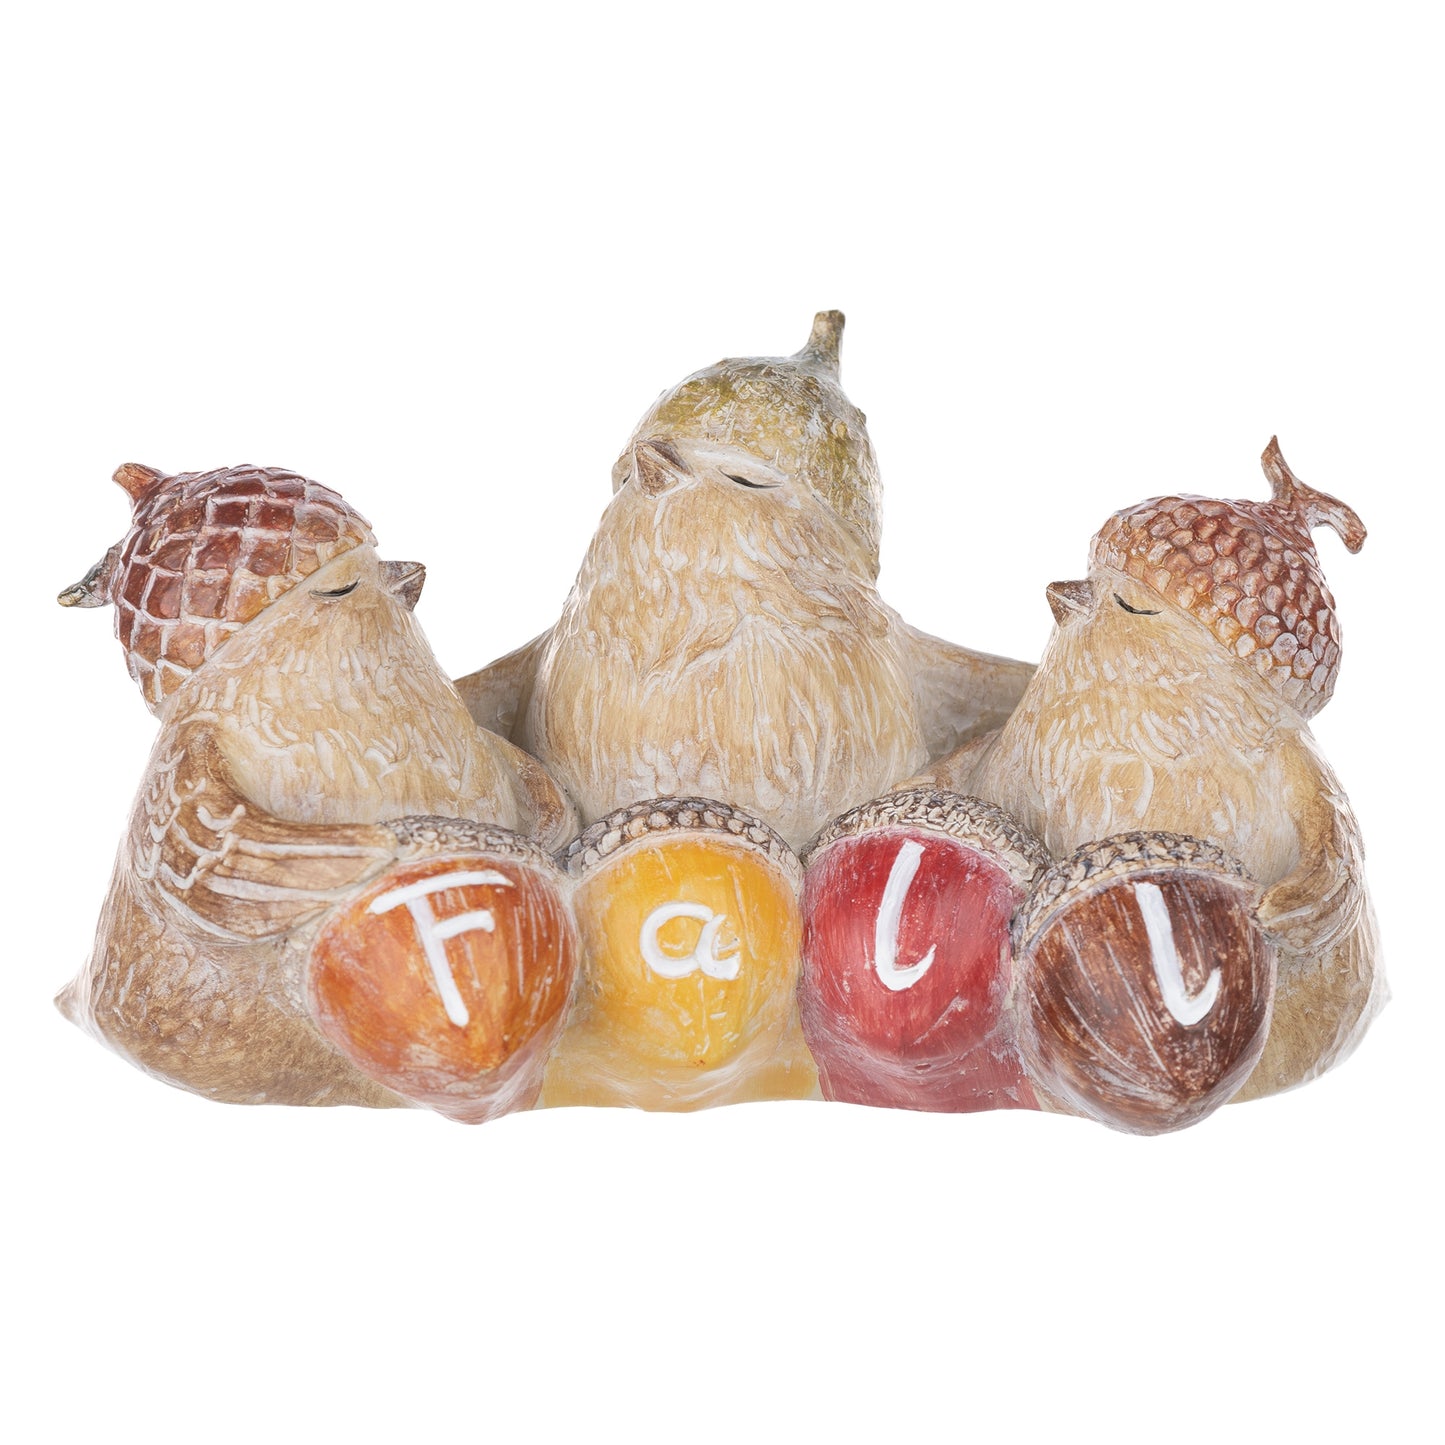 Fall birds with adorable acorn hats, Crafted with quality polyresin and stone powder, these cheerful decorations feature earthy brown and orange tones, an etched wood design, adorable acorn hat accent, and the sentiment "Fall"